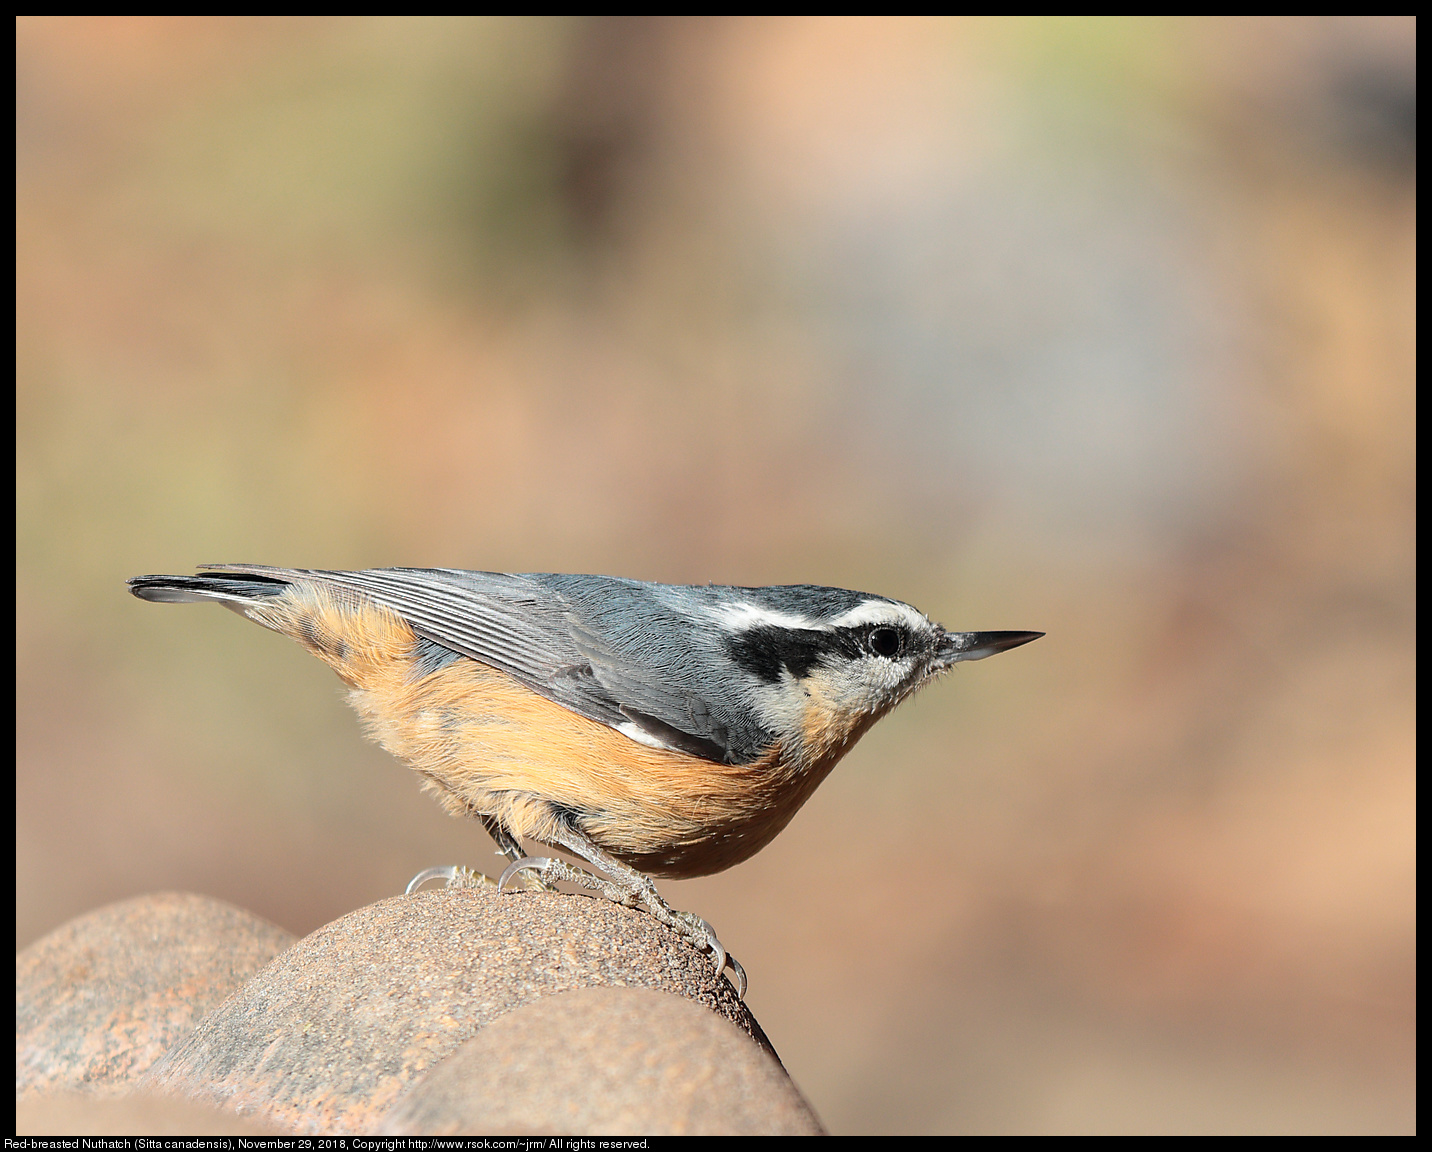 Red-breasted Nuthatch (Sitta canadensis), November 29, 2018